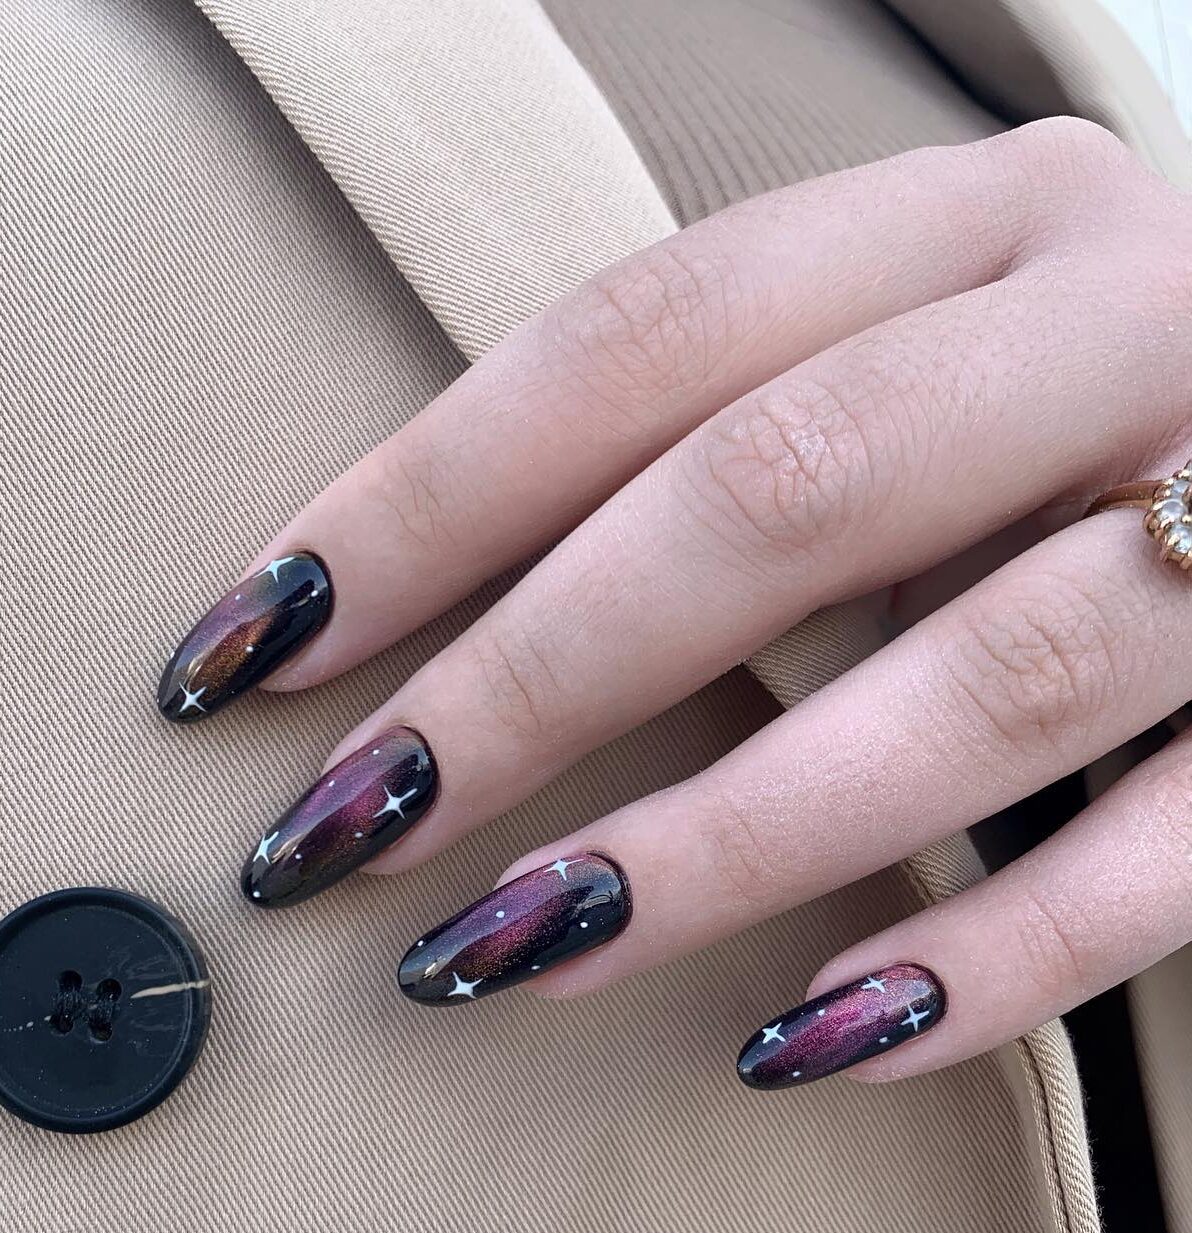 Combination of black and purple nail colors with galaxy-inspired nail design on long round nails